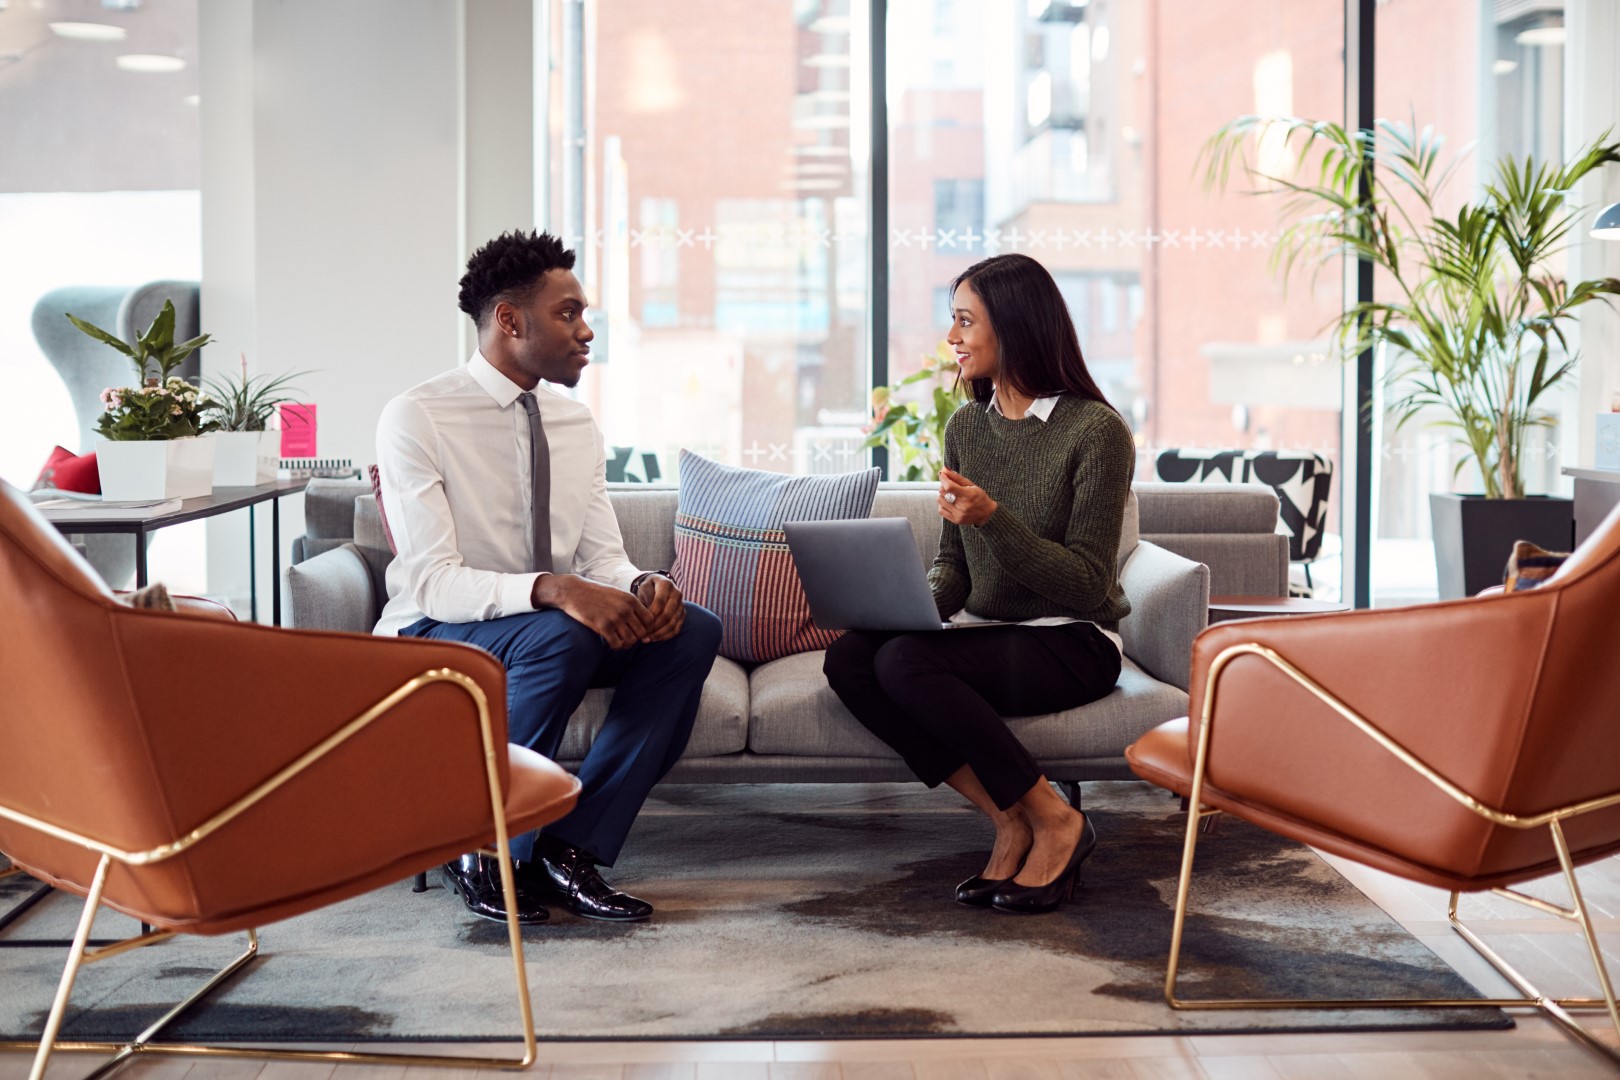 Businesswoman Interviewing Male Job Candidate In Seating Area Of Modern Office